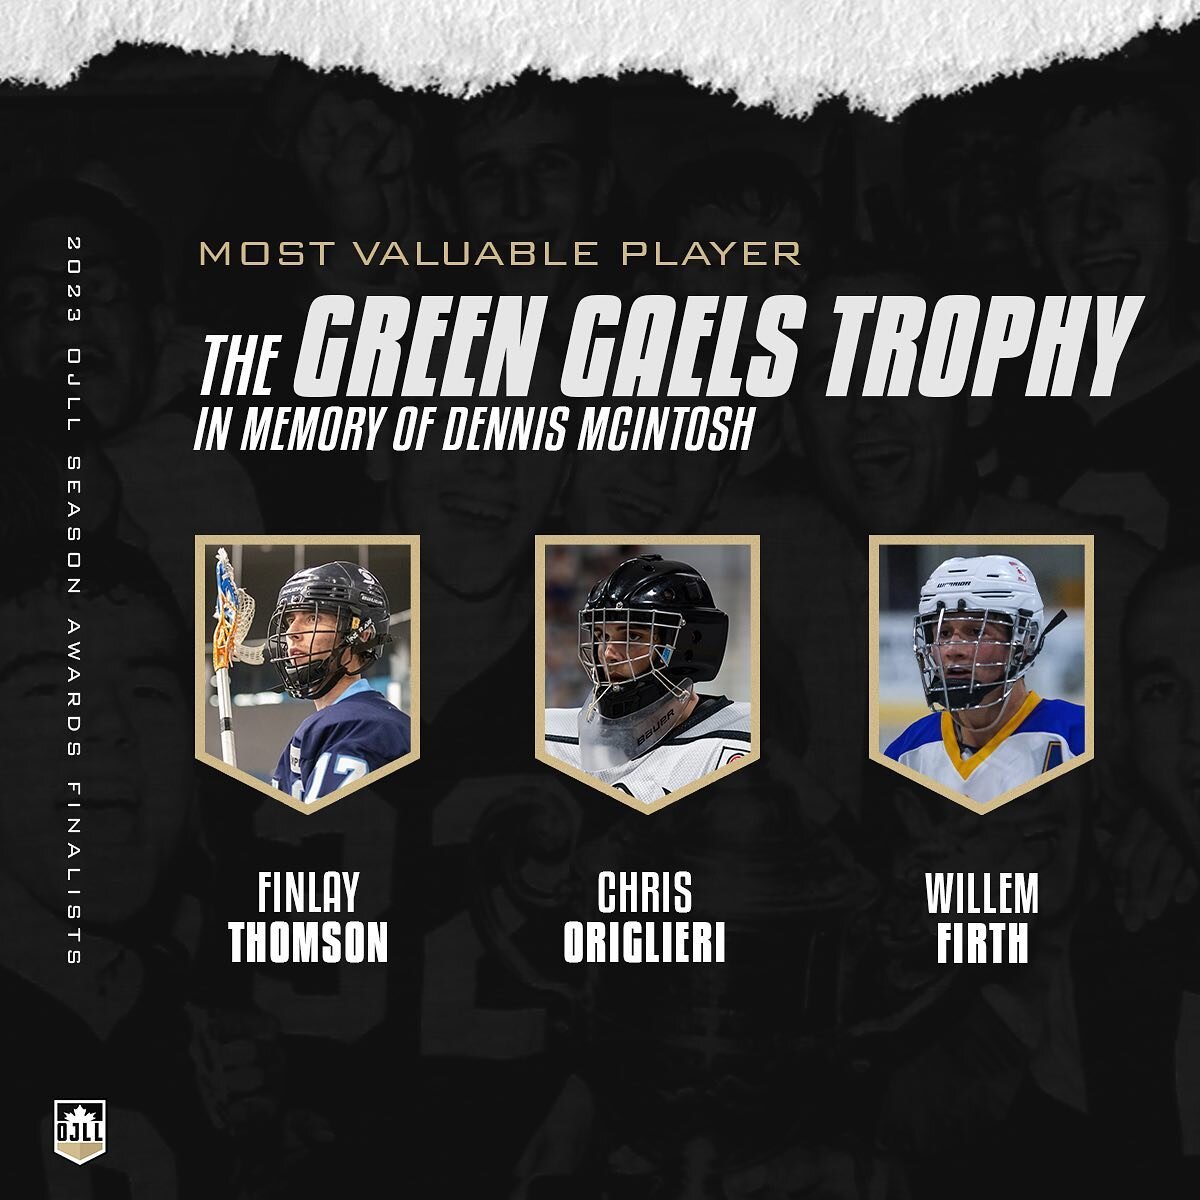 The finalists for the Green Gaels Trophy in memory of Dennis McIntosh, presented annually to the OJLL MVP:

🏆 Finlay Thomson (@MimicoJrALax)
🏆 Chris Origlieri (@JrANorthmen)
🏆 Willem Firth (@BeachesJrA)

#OJLLAwards will be presented during the On